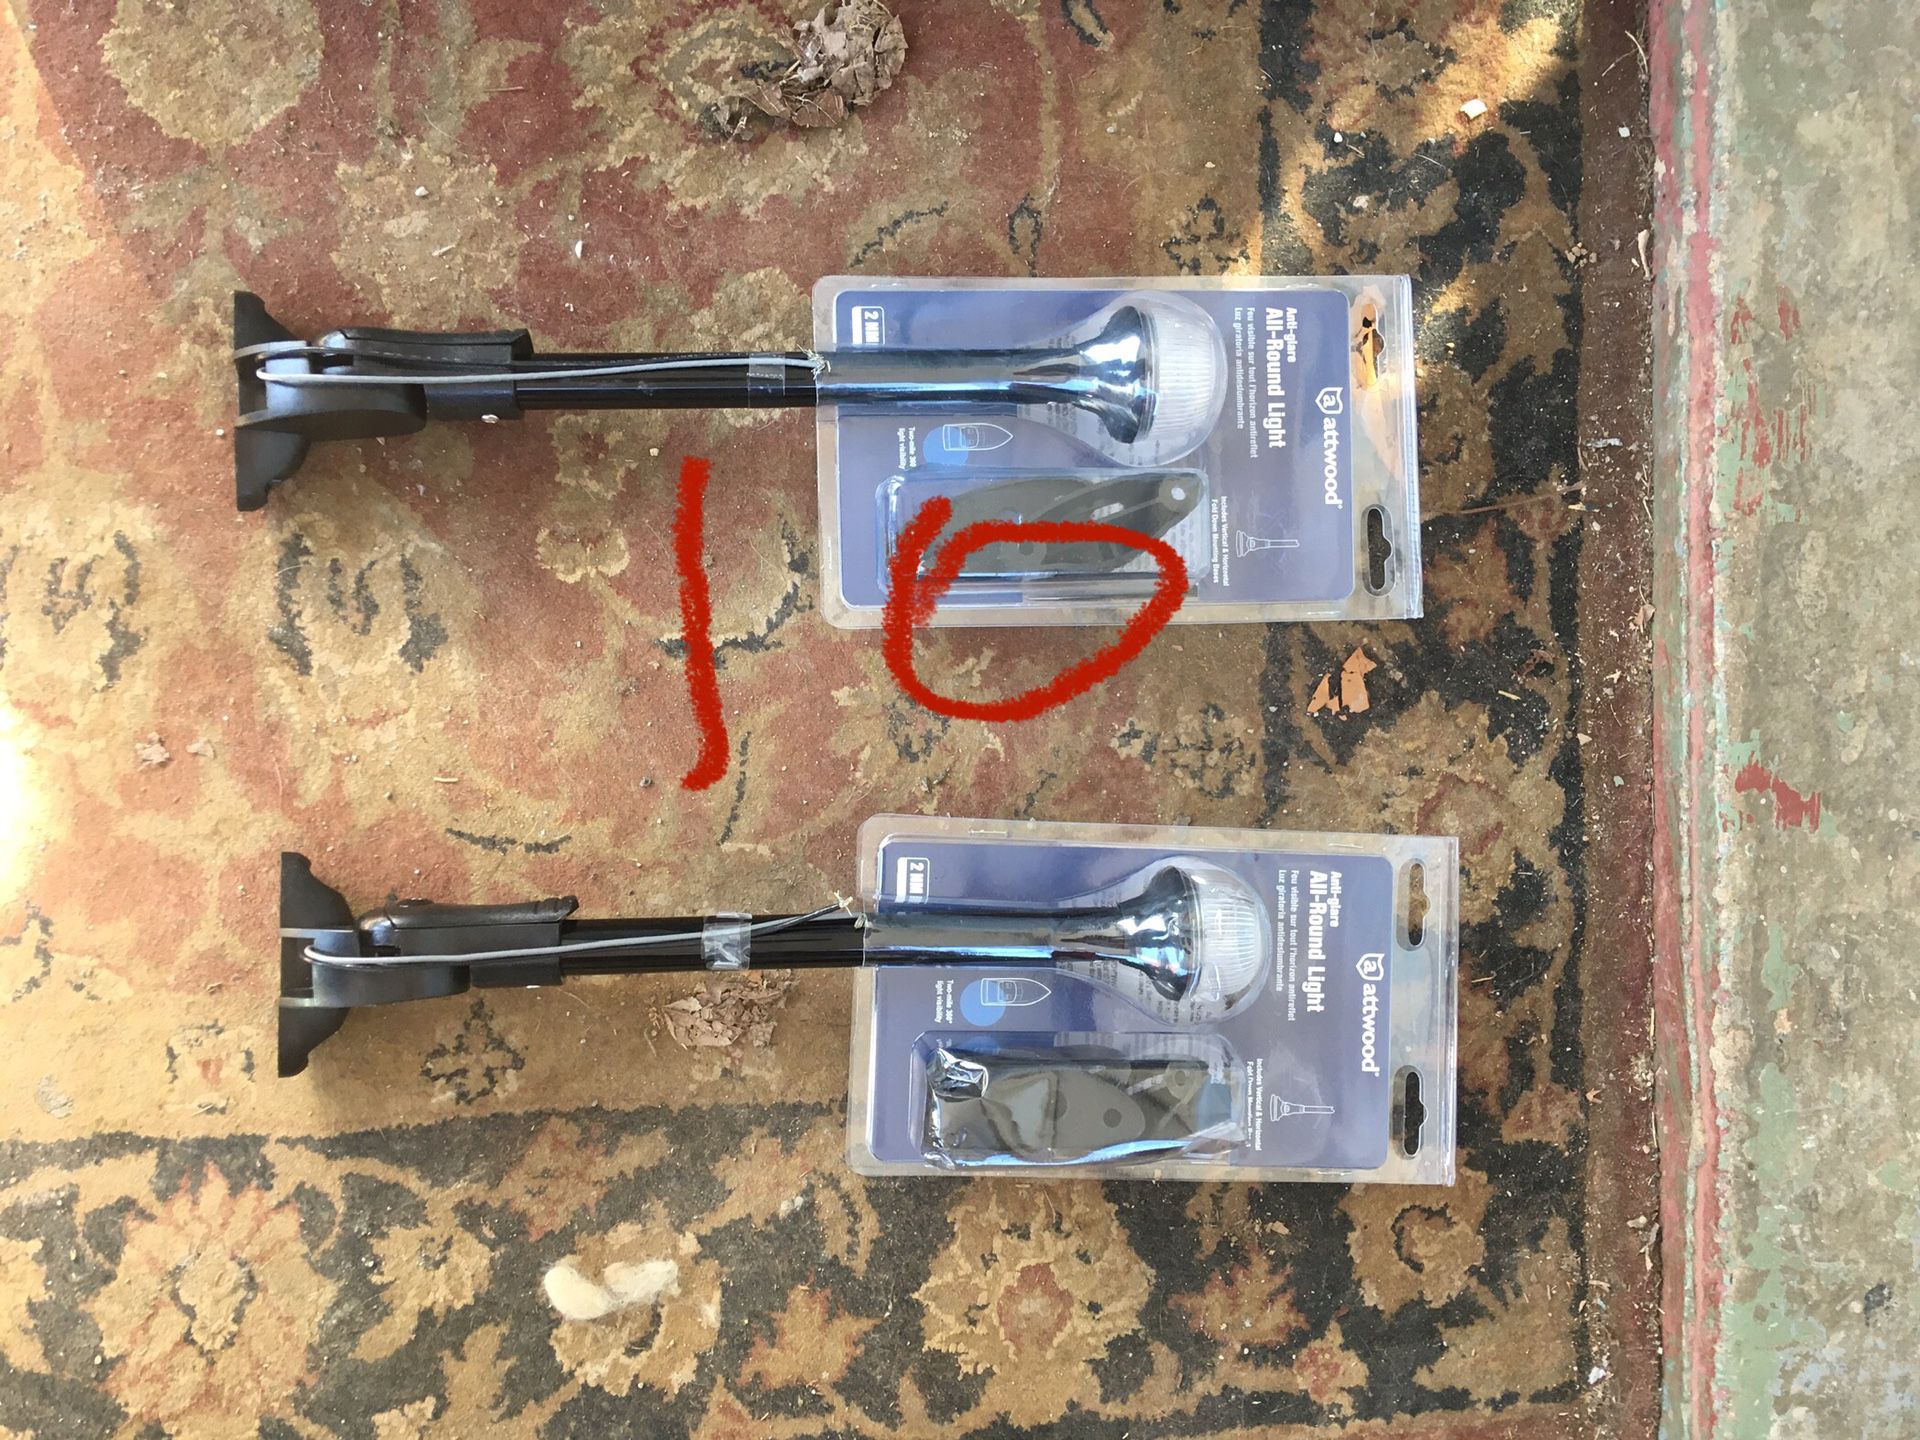 Two new 12volt boat lights $10 for both